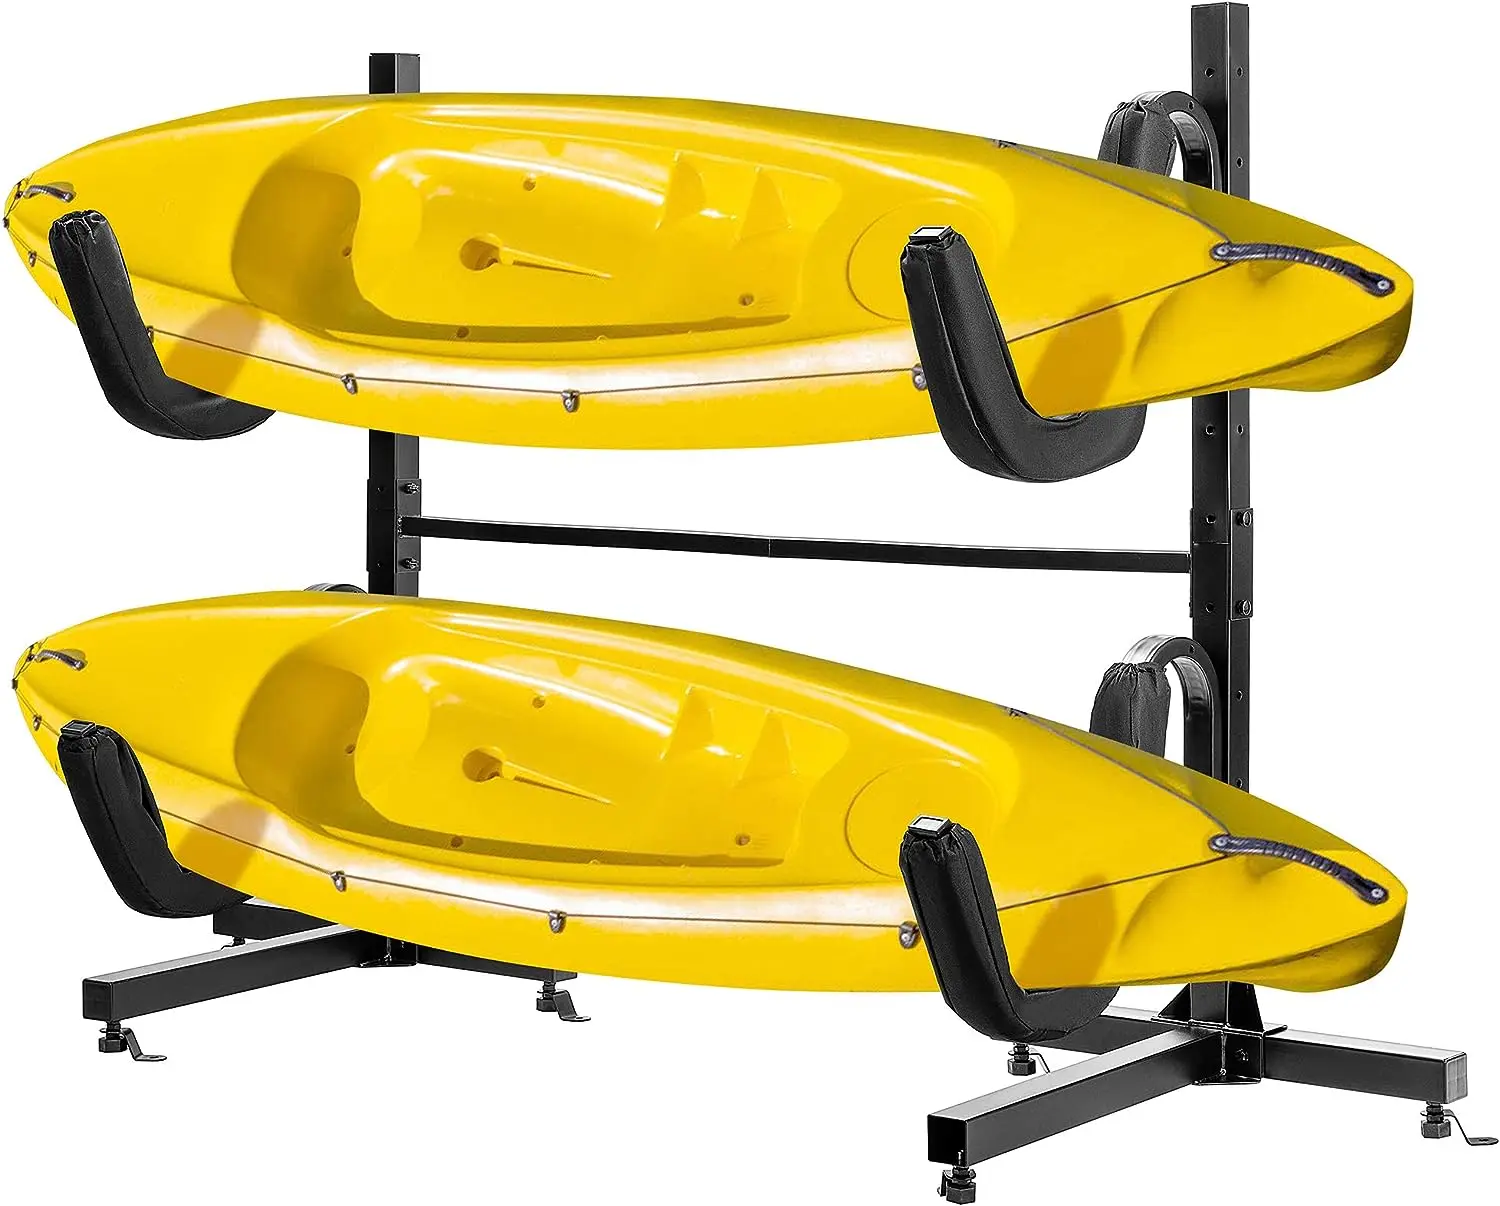 

Duty Freestanding Dual Storage Height Adjustable Carrier Stand for Kayaks SUP Paddle Boards and Canoes Pontoon boat accessories